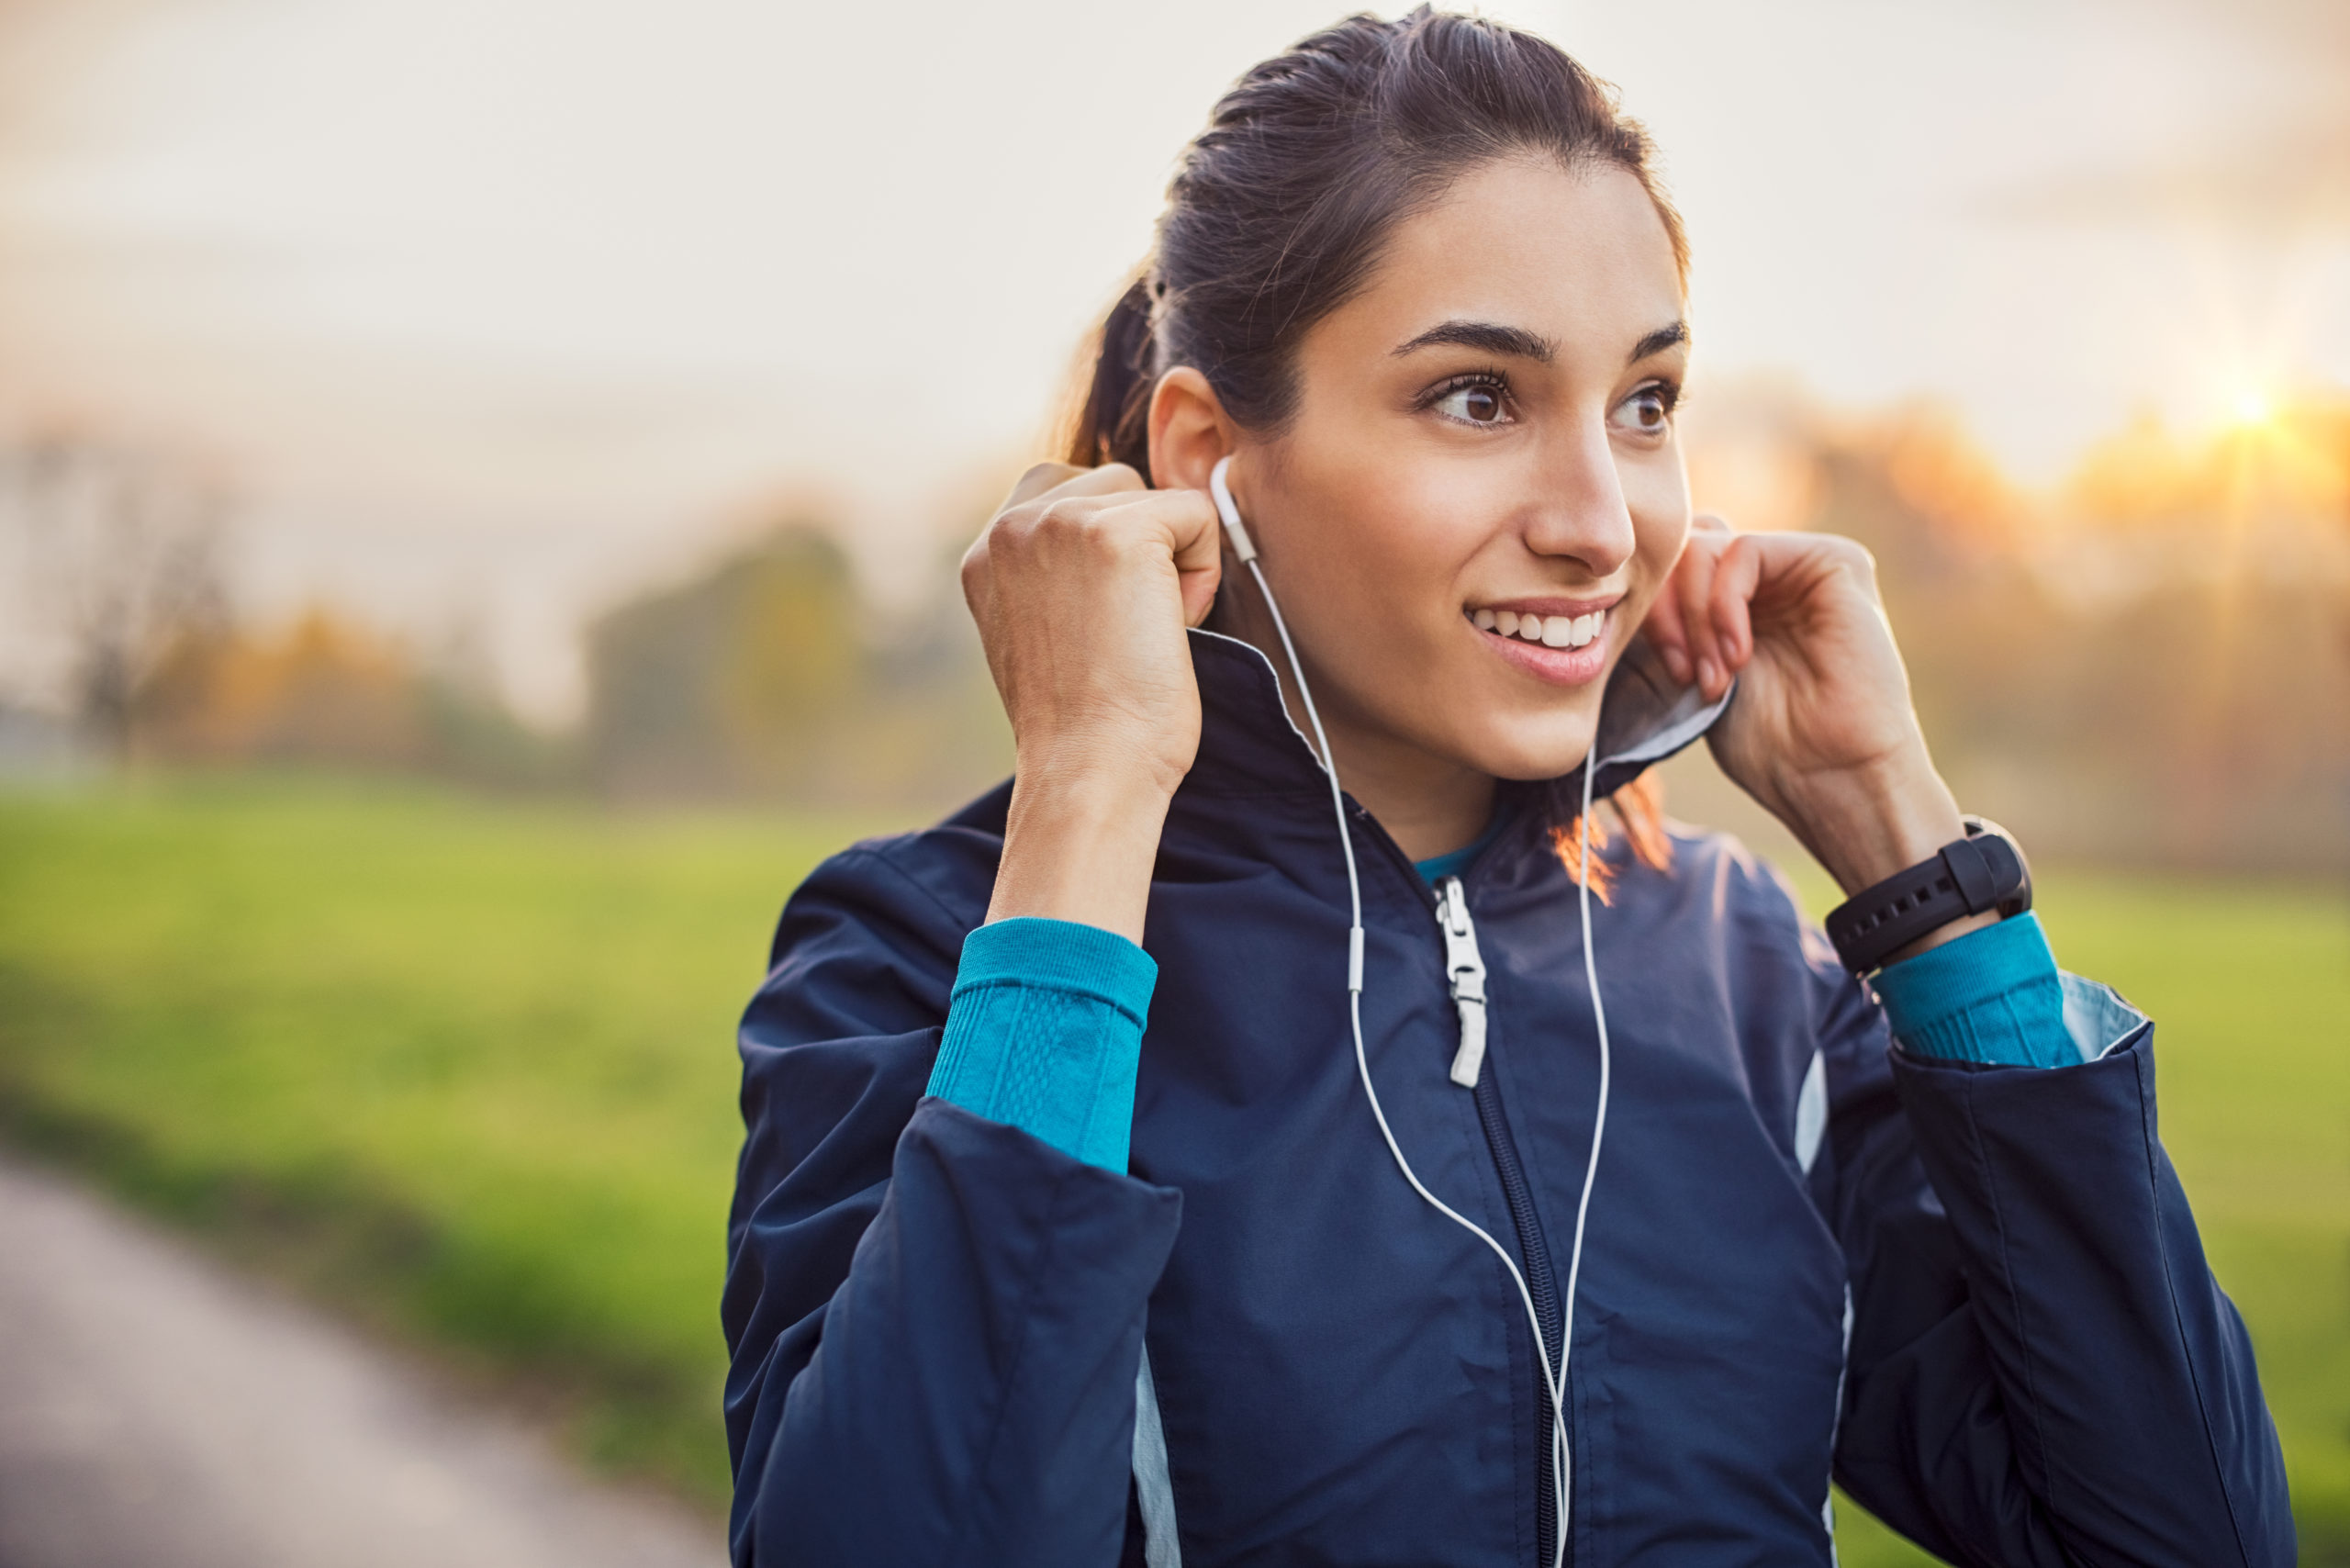 Young athlete adjusting jacket while listening to music at park. Smiling young woman feeling relaxed after a long run during the sunset. Happy sporty woman smiling and looking away during workout.